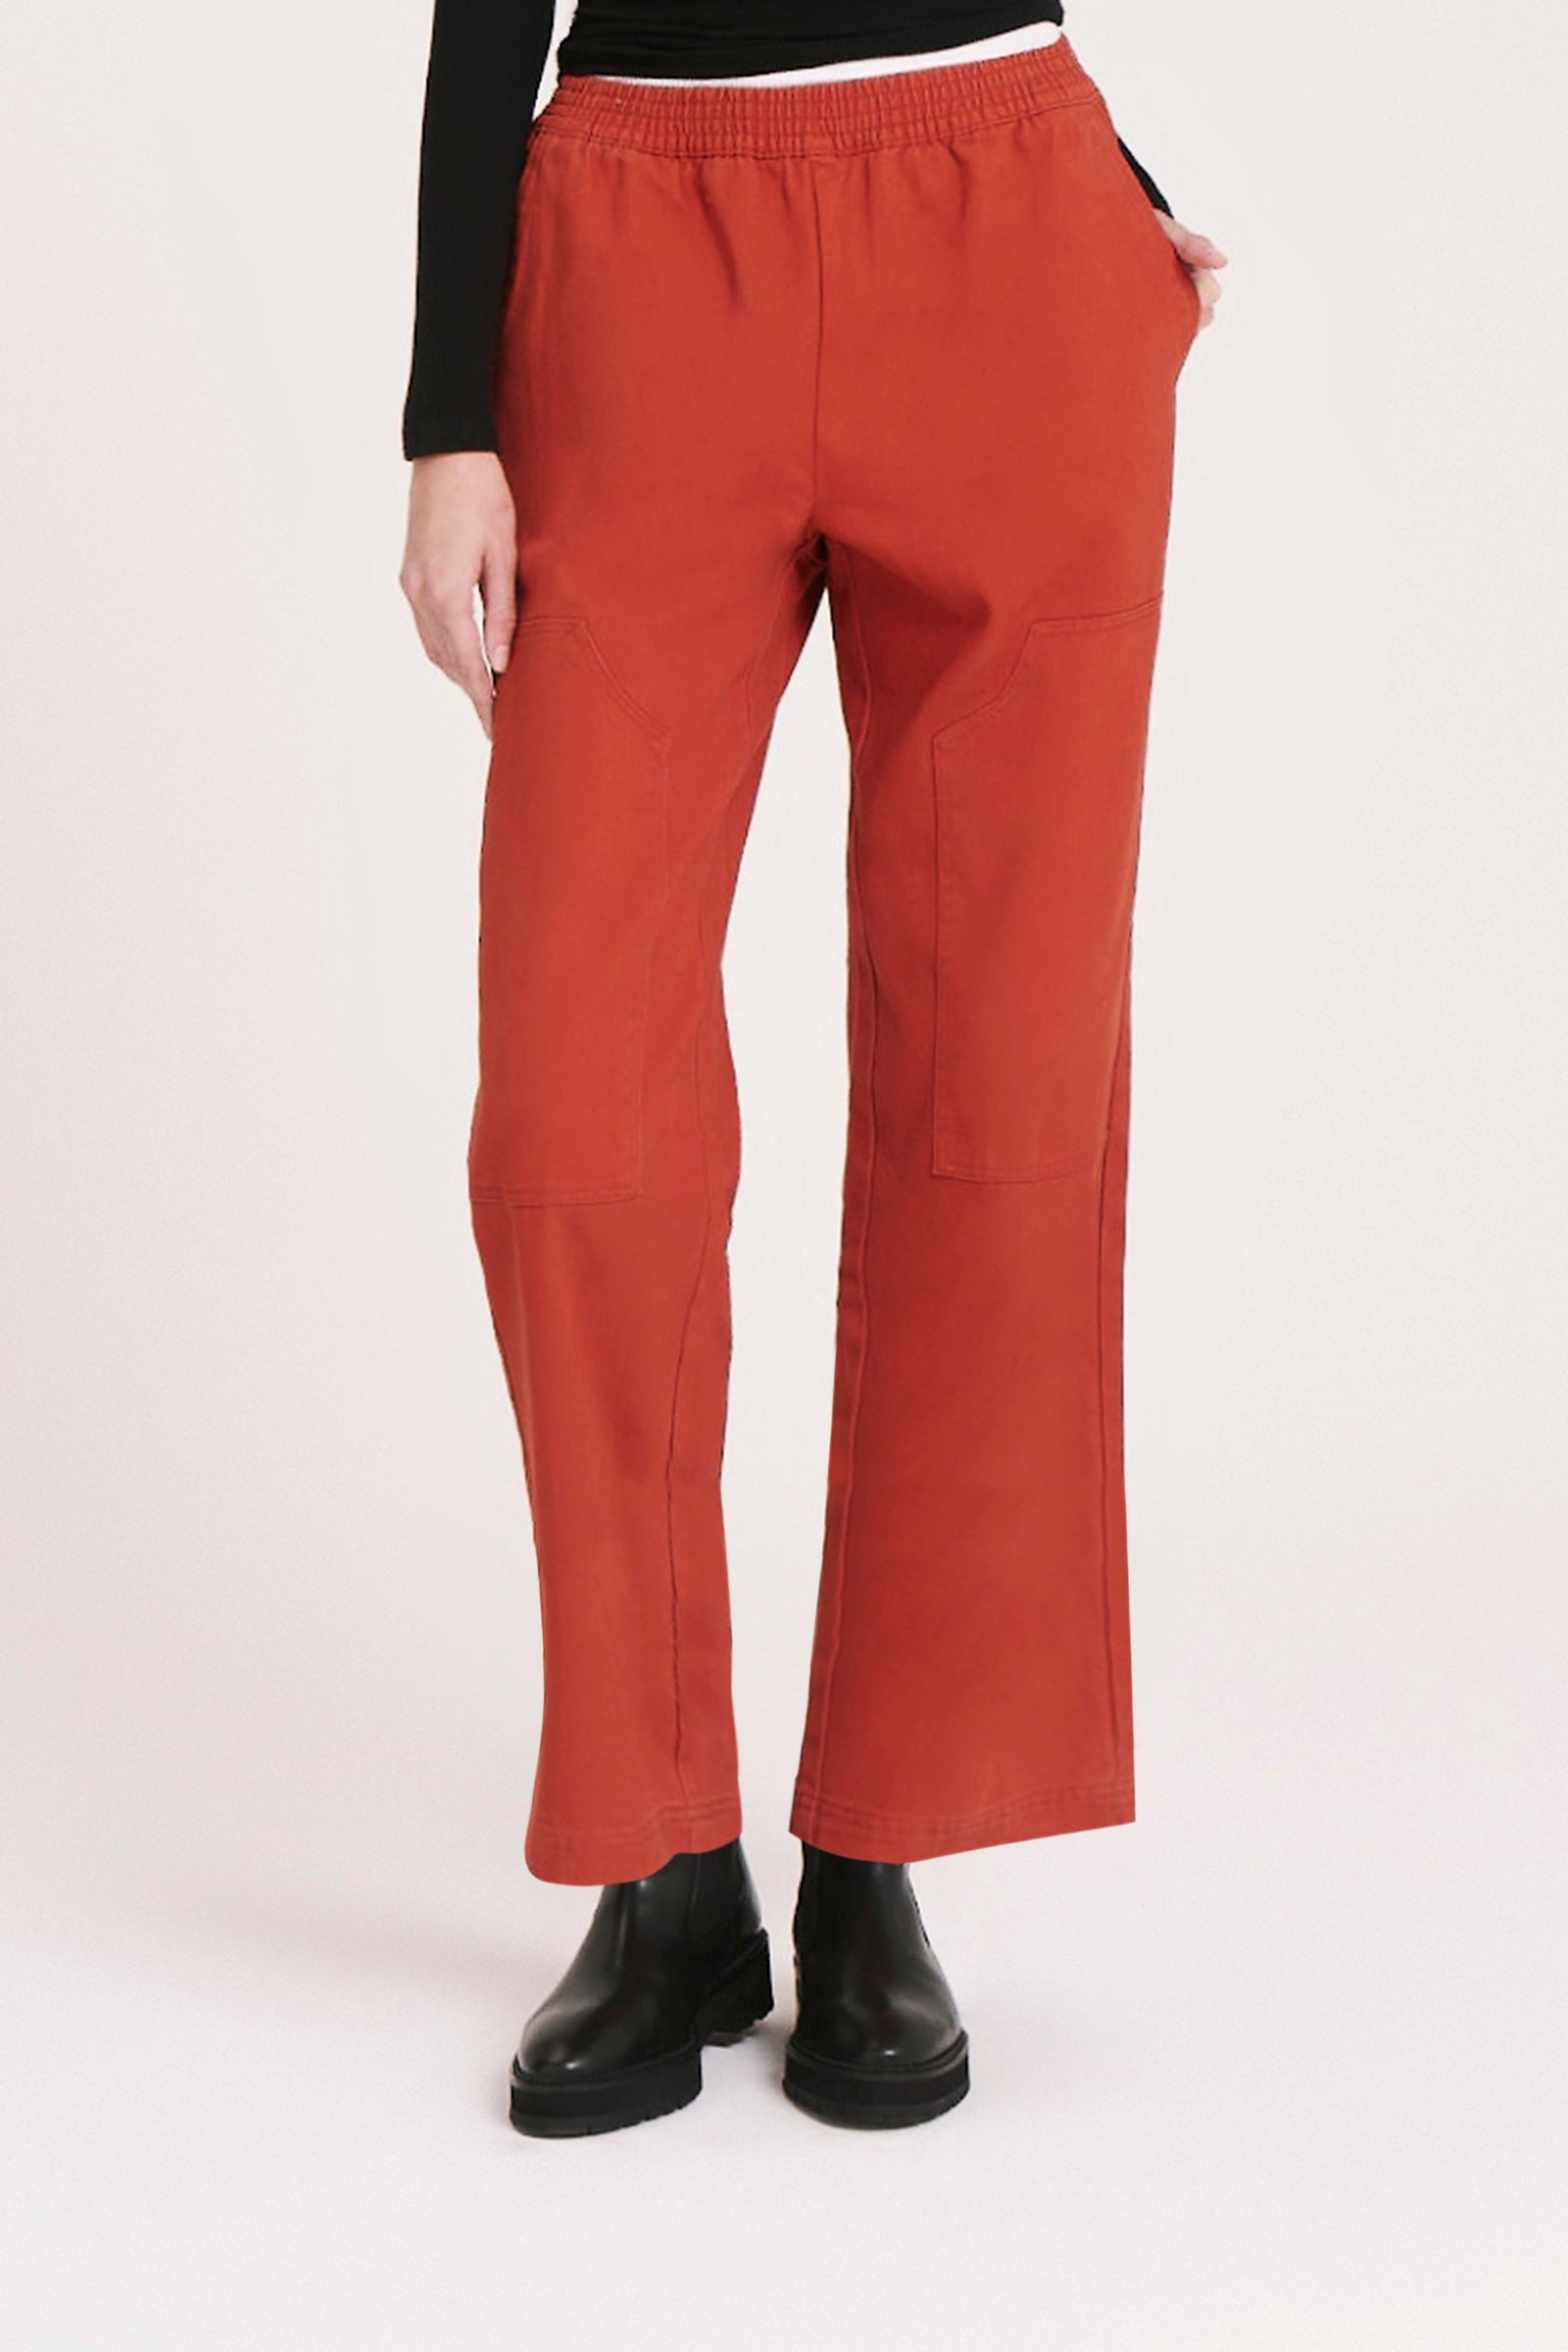 Nude Lucy Margo Utility Pant in Sienna